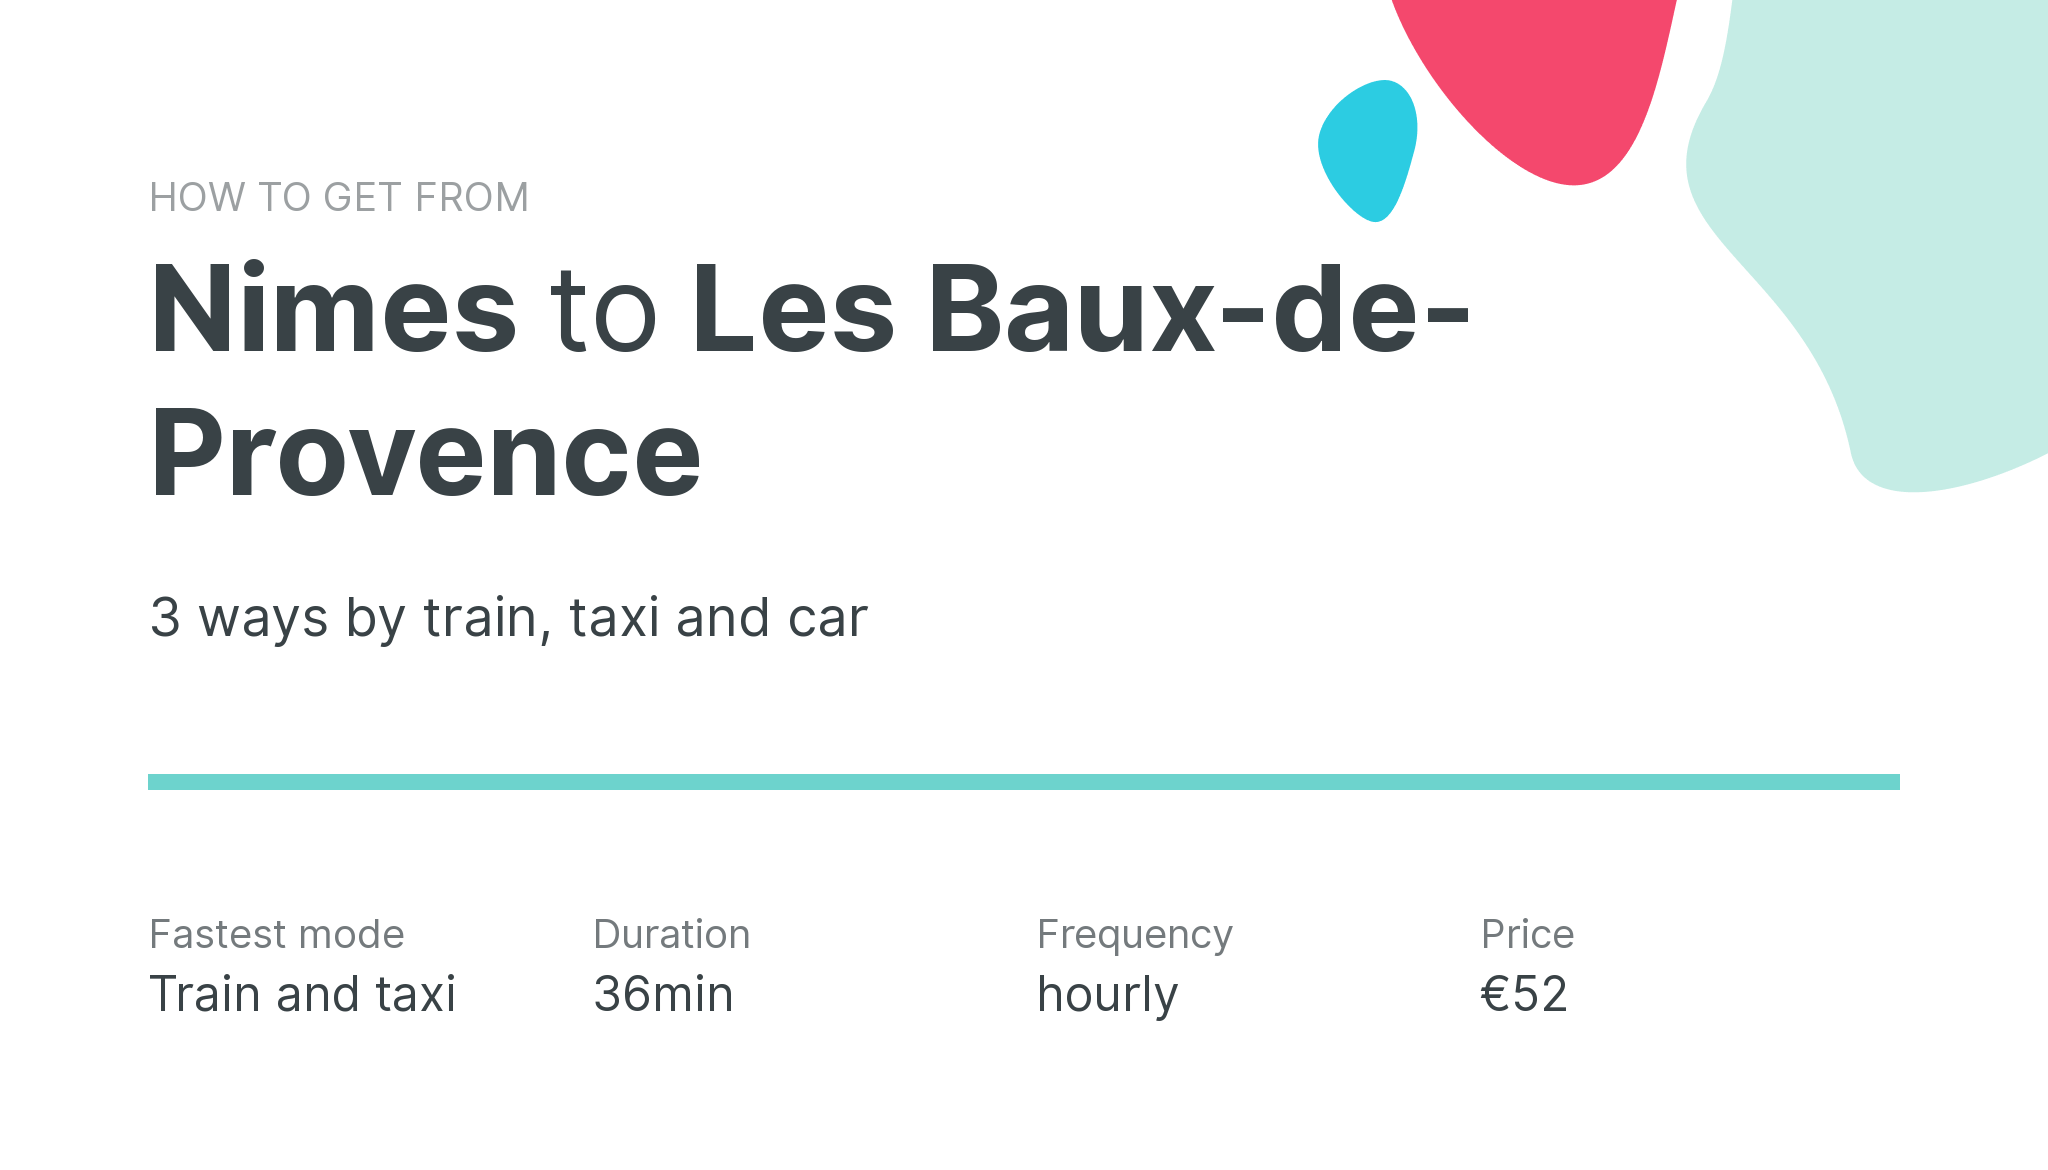 How do I get from Nimes to Les Baux-de-Provence